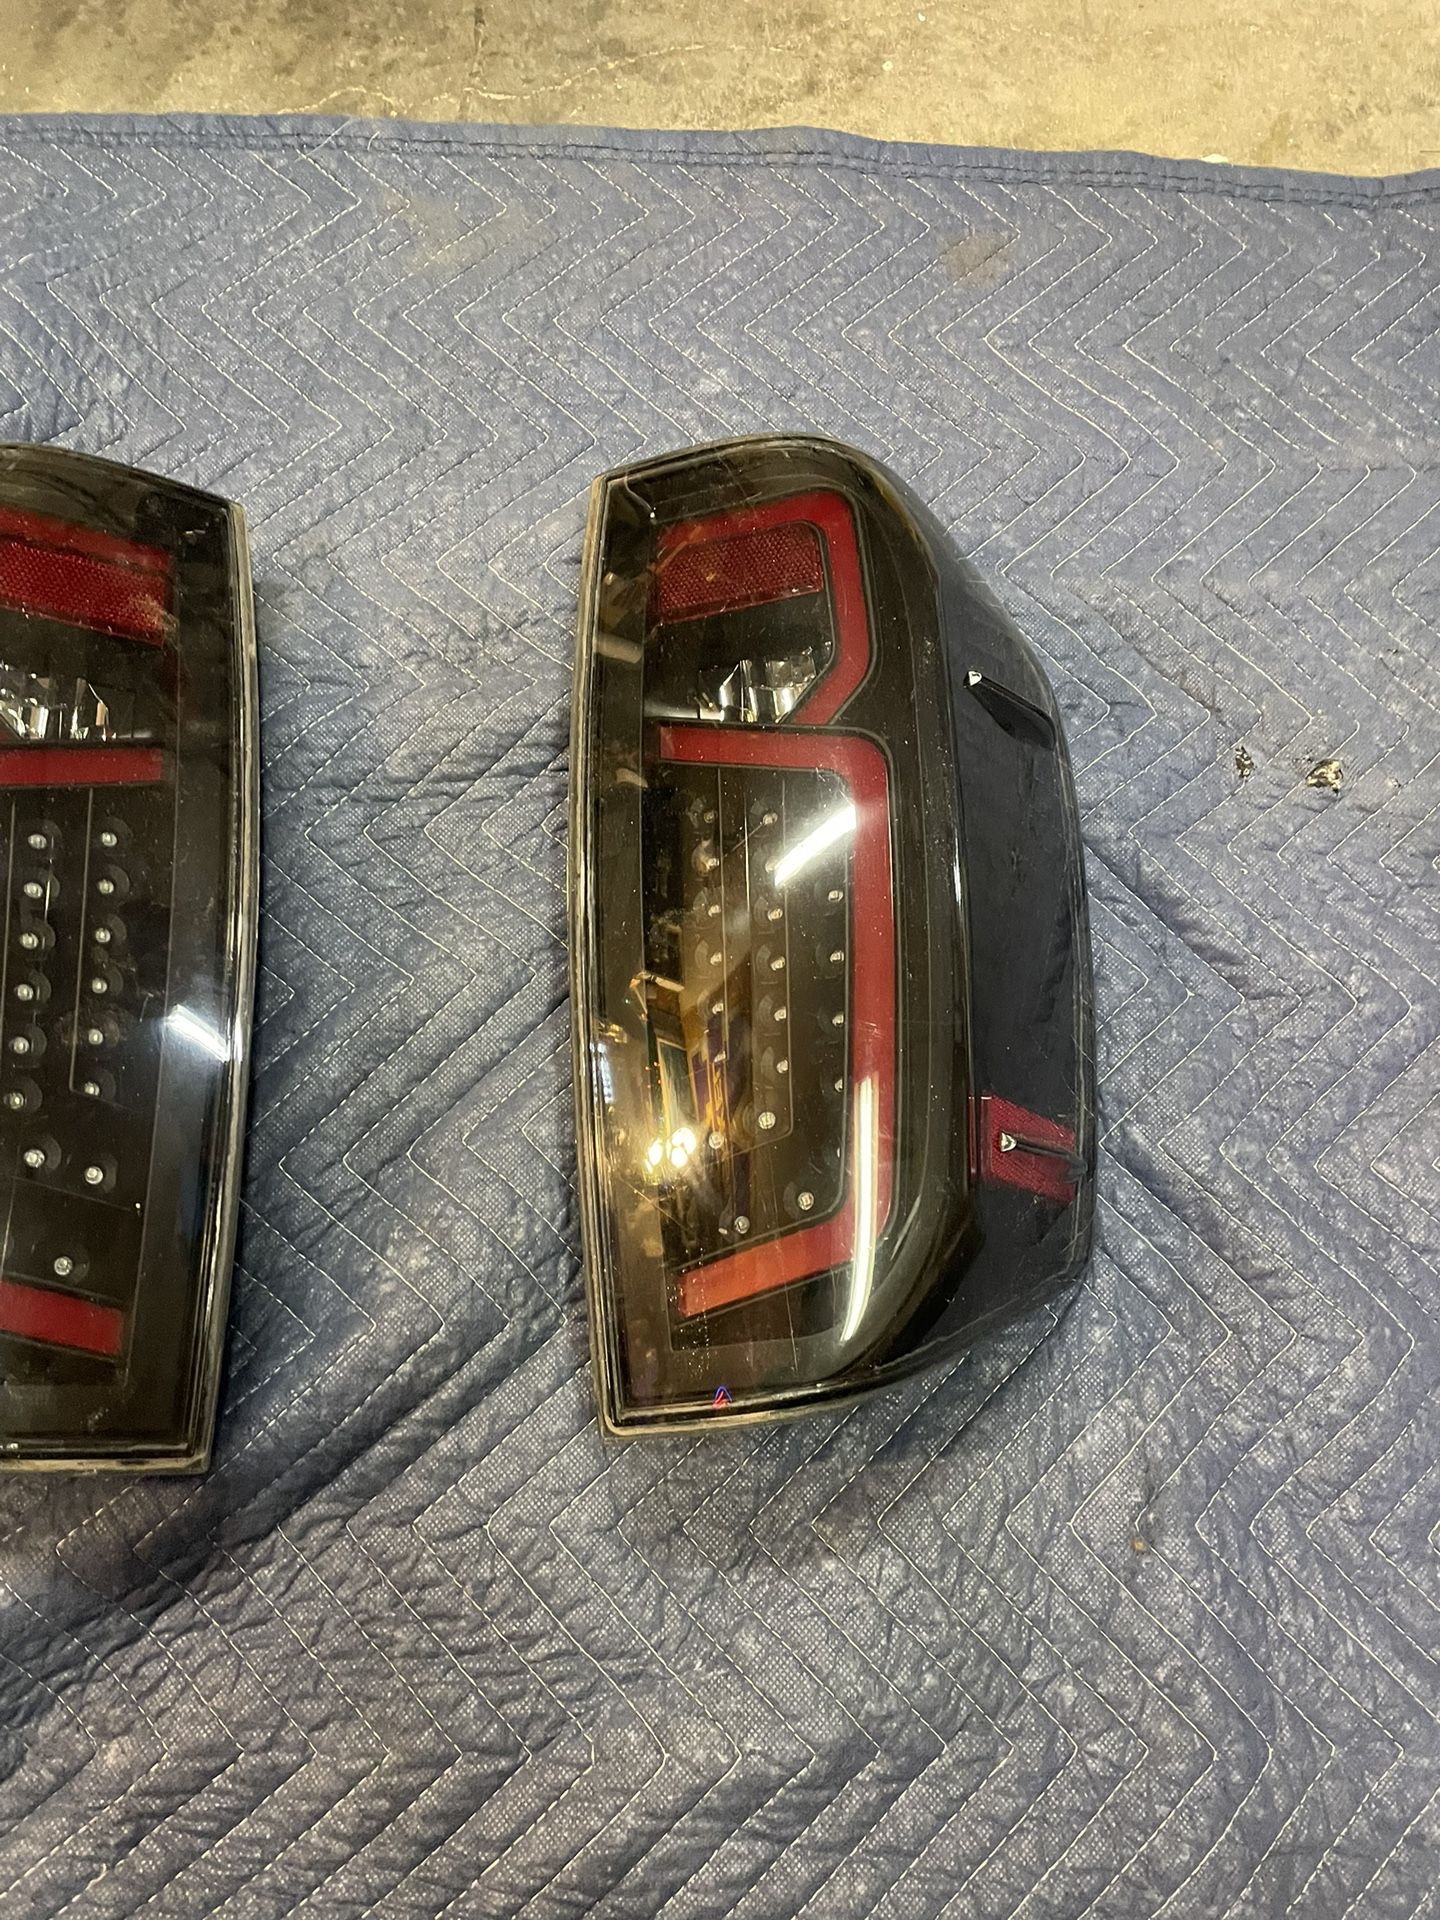 2021 Toyota Tundra Smoked Out Led Tail Lights